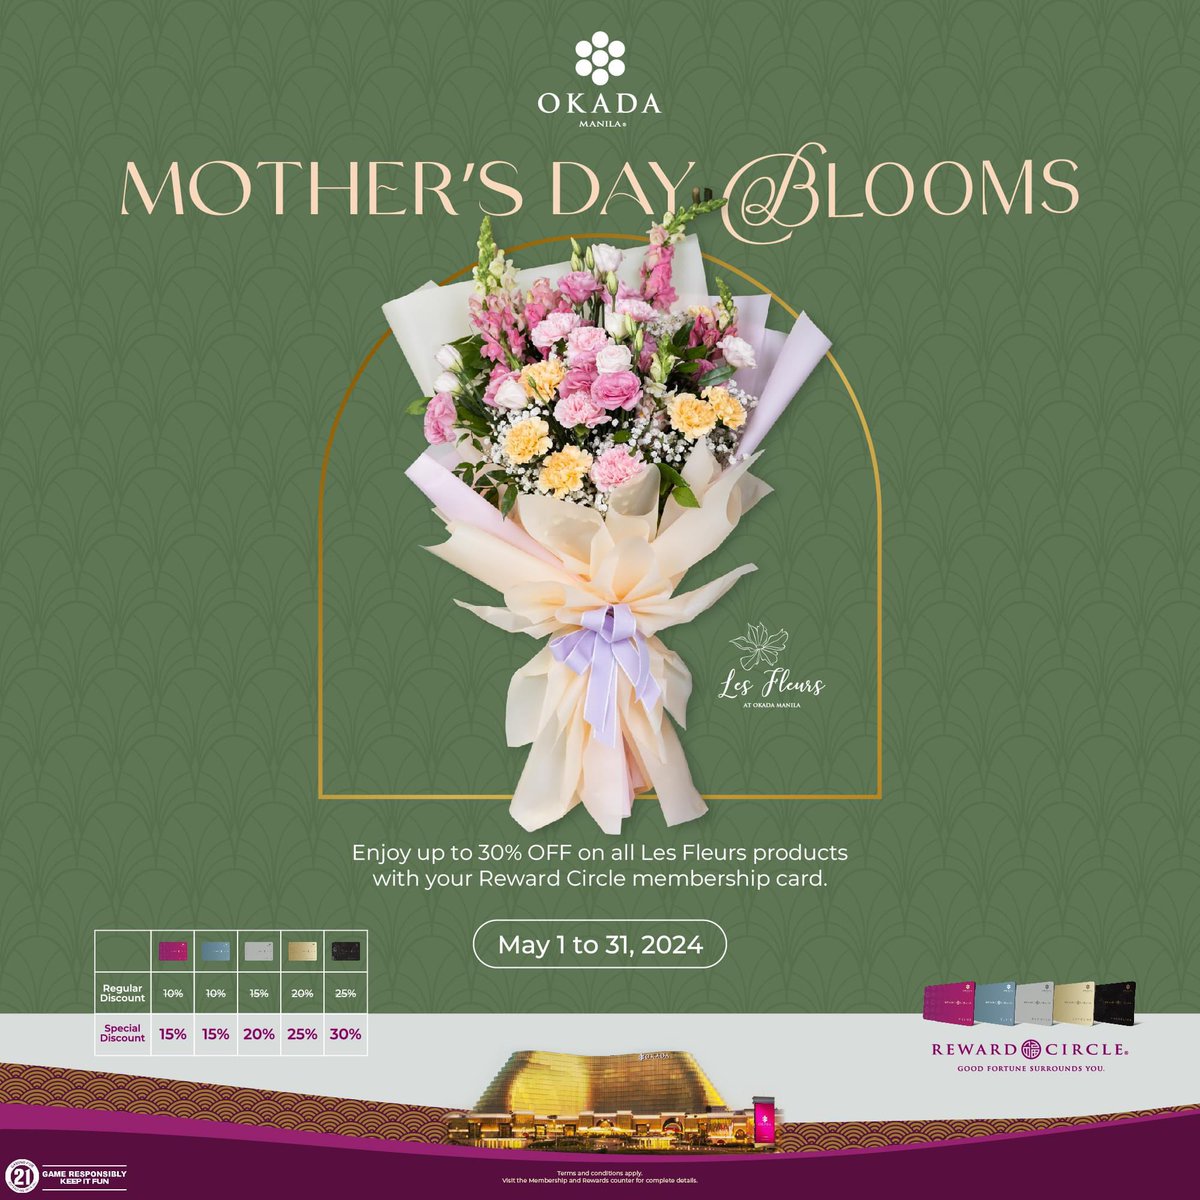 Shower Mom with love and savings this Mother's Day! Simply present your Reward Circle membership card and get up to 30% on all Les Fleurs products. Don't miss out on this exclusive offer! To know more, visit okdmnl.ph/PamperHerWithP…